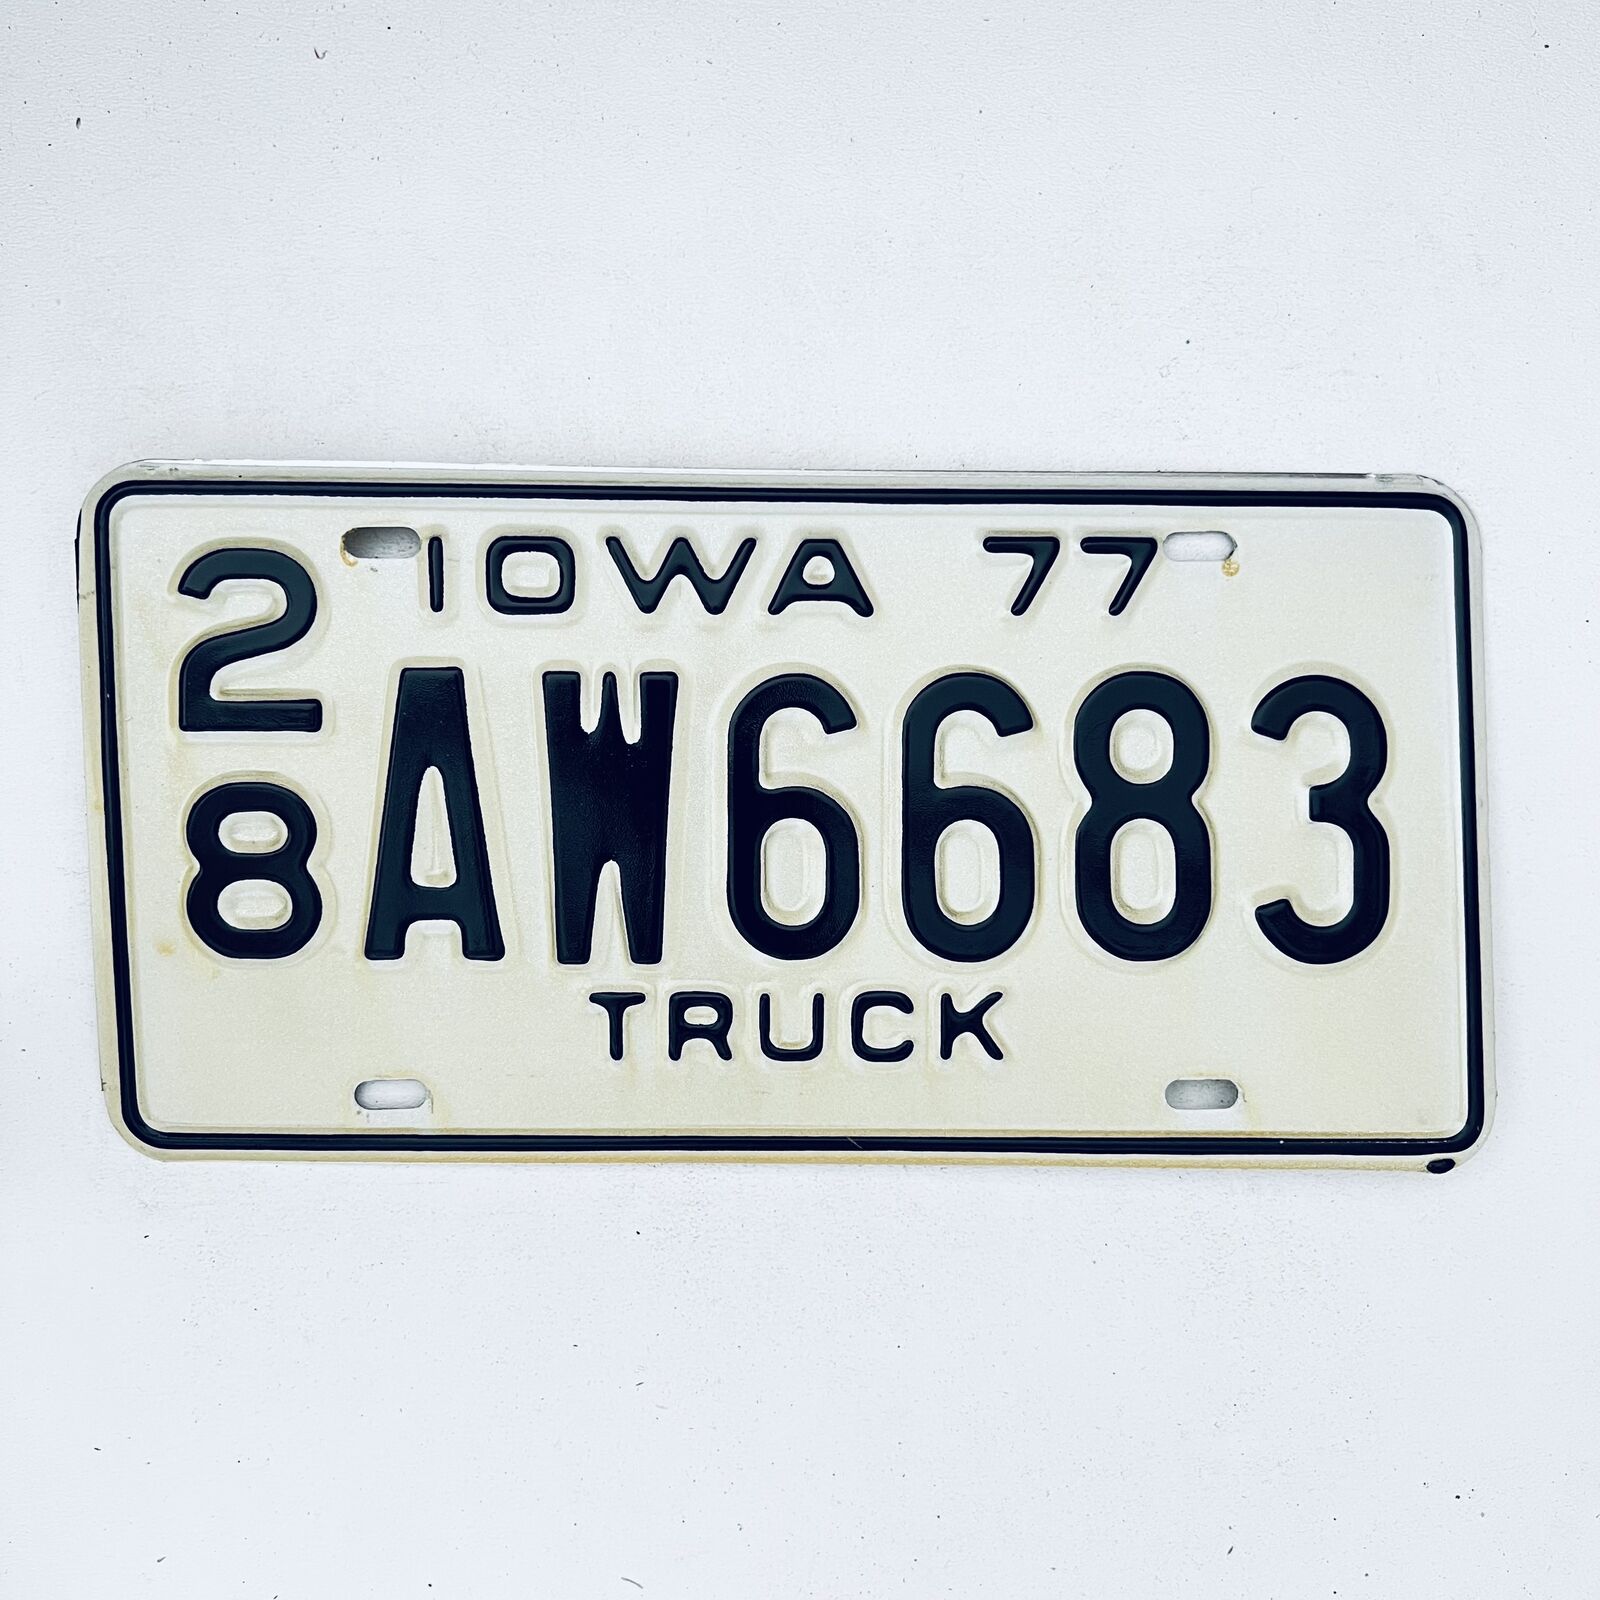 1977 United States Iowa Delaware County Passenger License Plate 28 AW6683